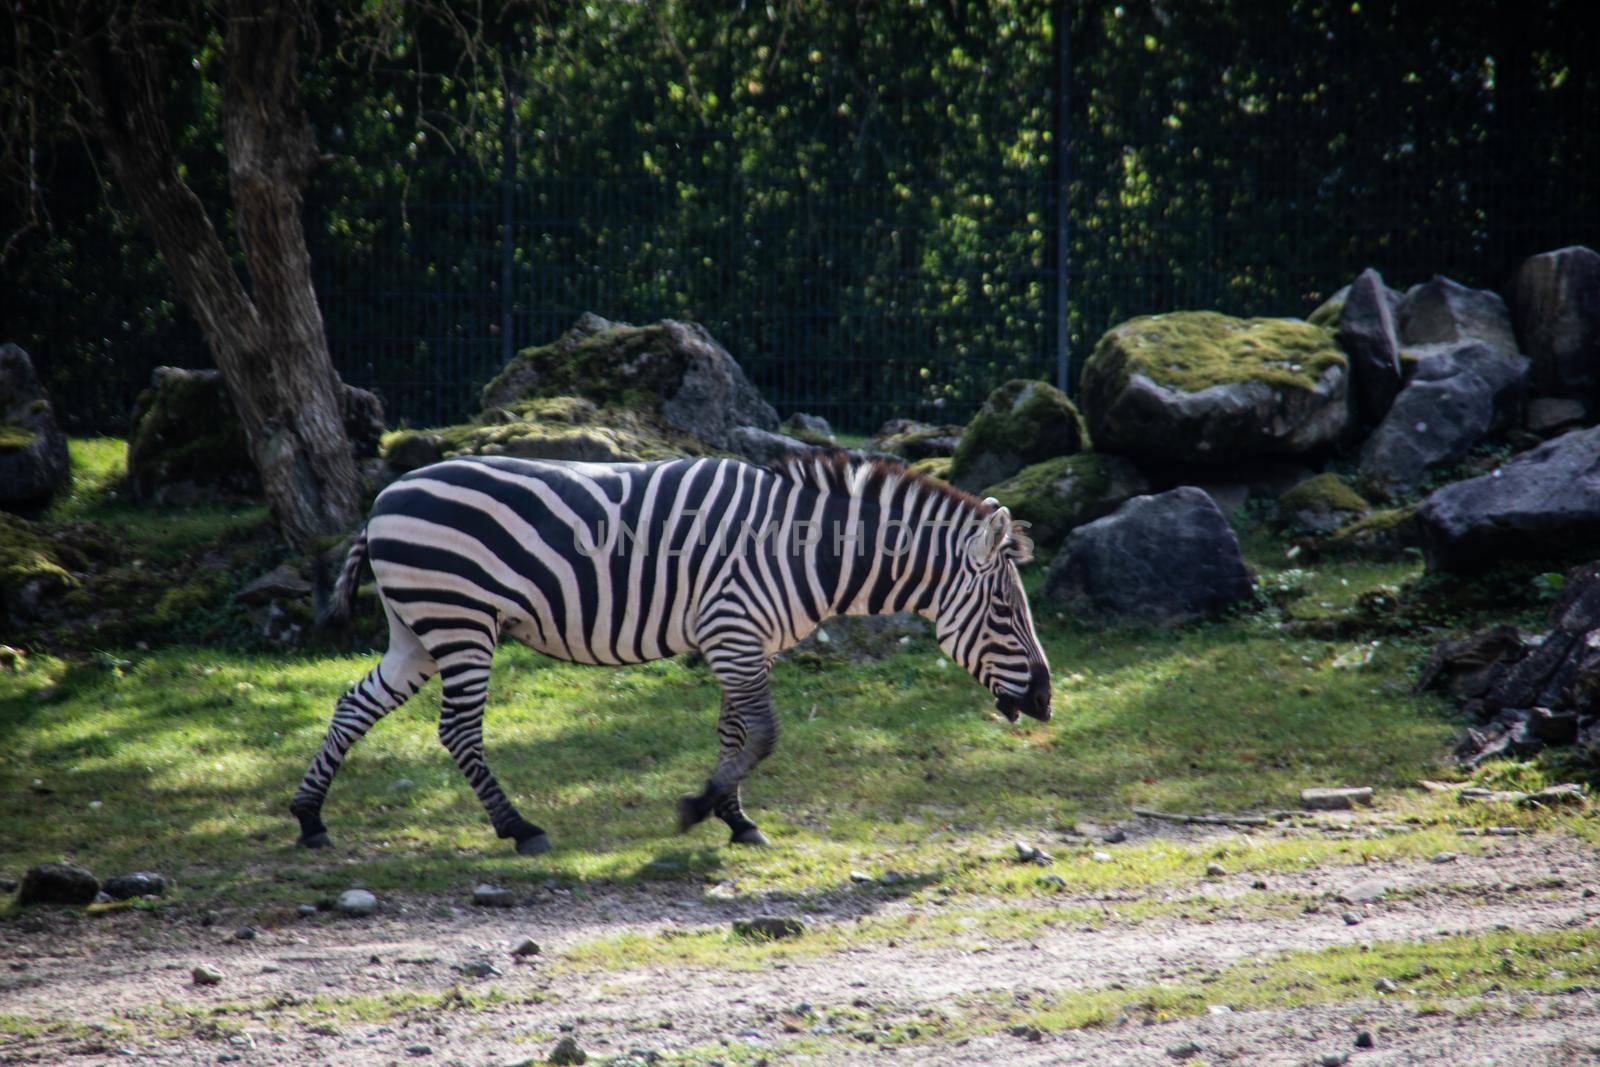 Zebra is in the park by Dr-Lange